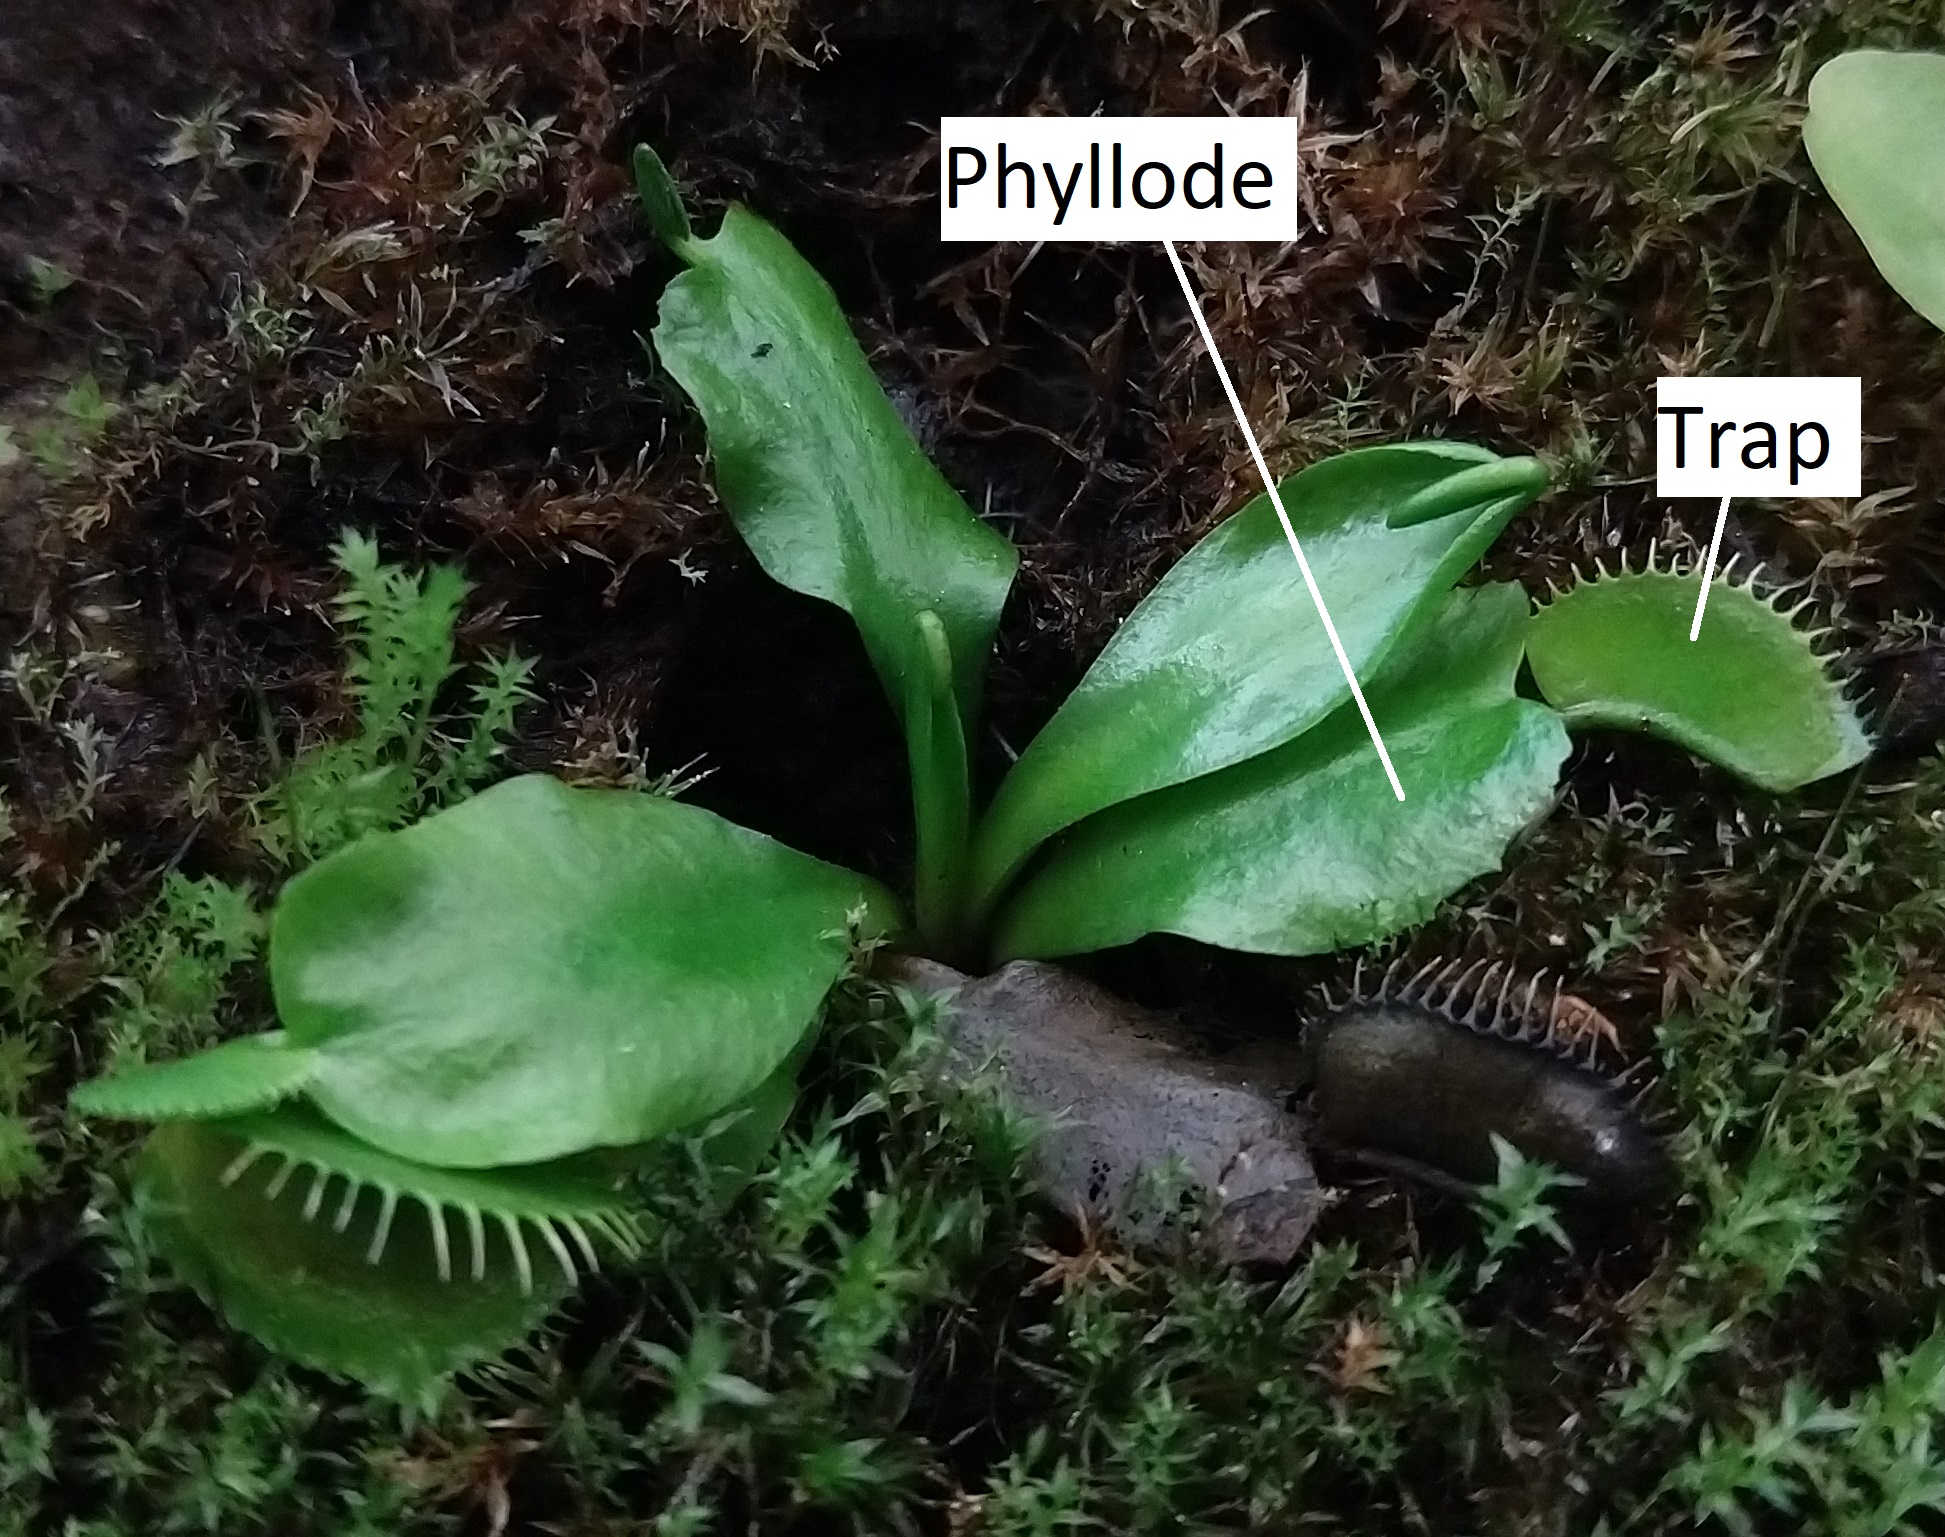 Dionaea (venus fly trap) leaf trap with teeth and flattened phyllode, labeled